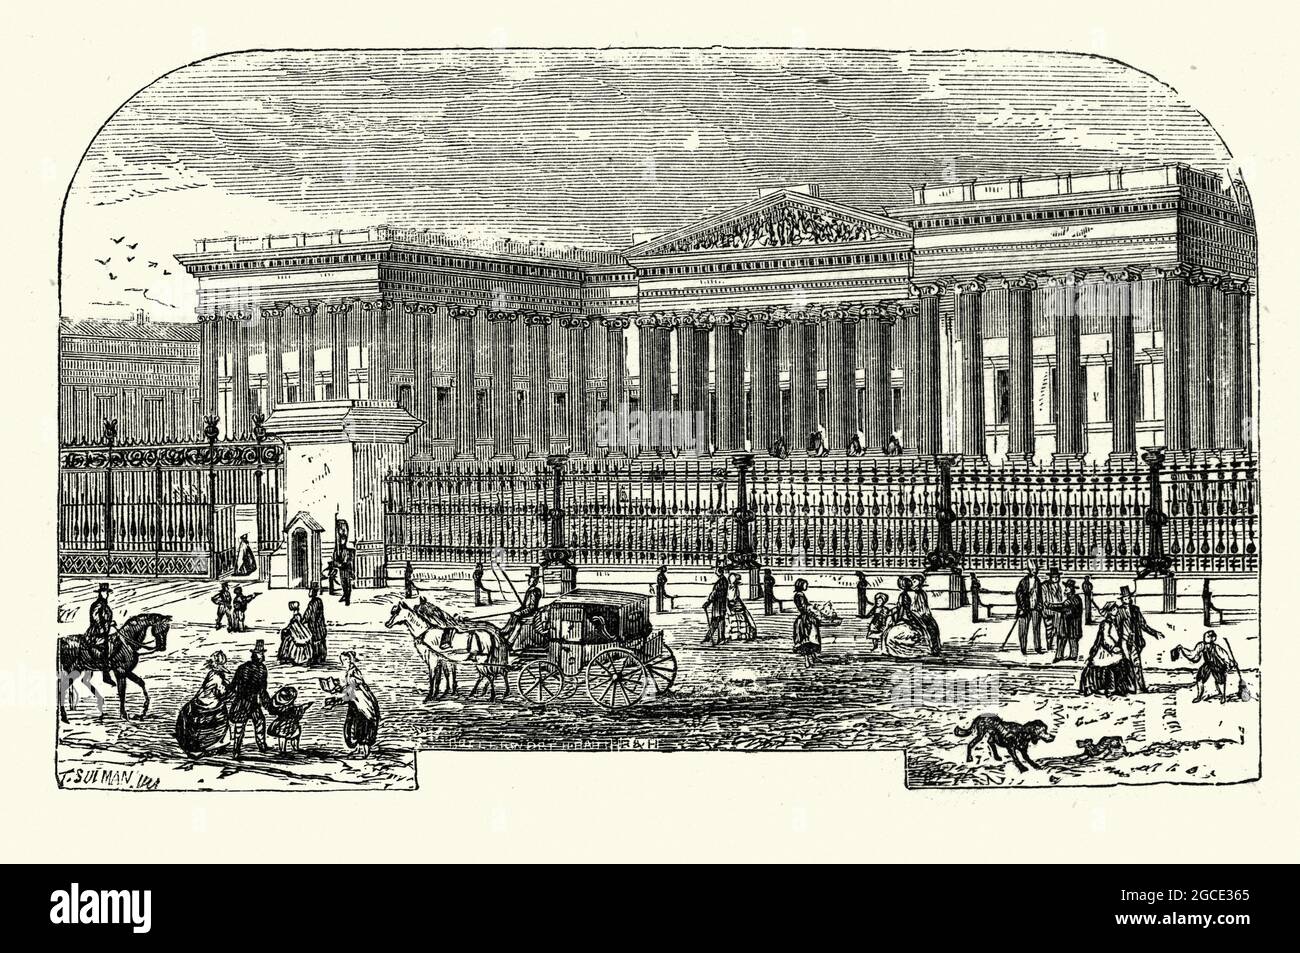 Vintage engraving of British Museum, London, England. 1893. The British Museum is a museum dedicated to human history, art, and culture, located in th Stock Photo